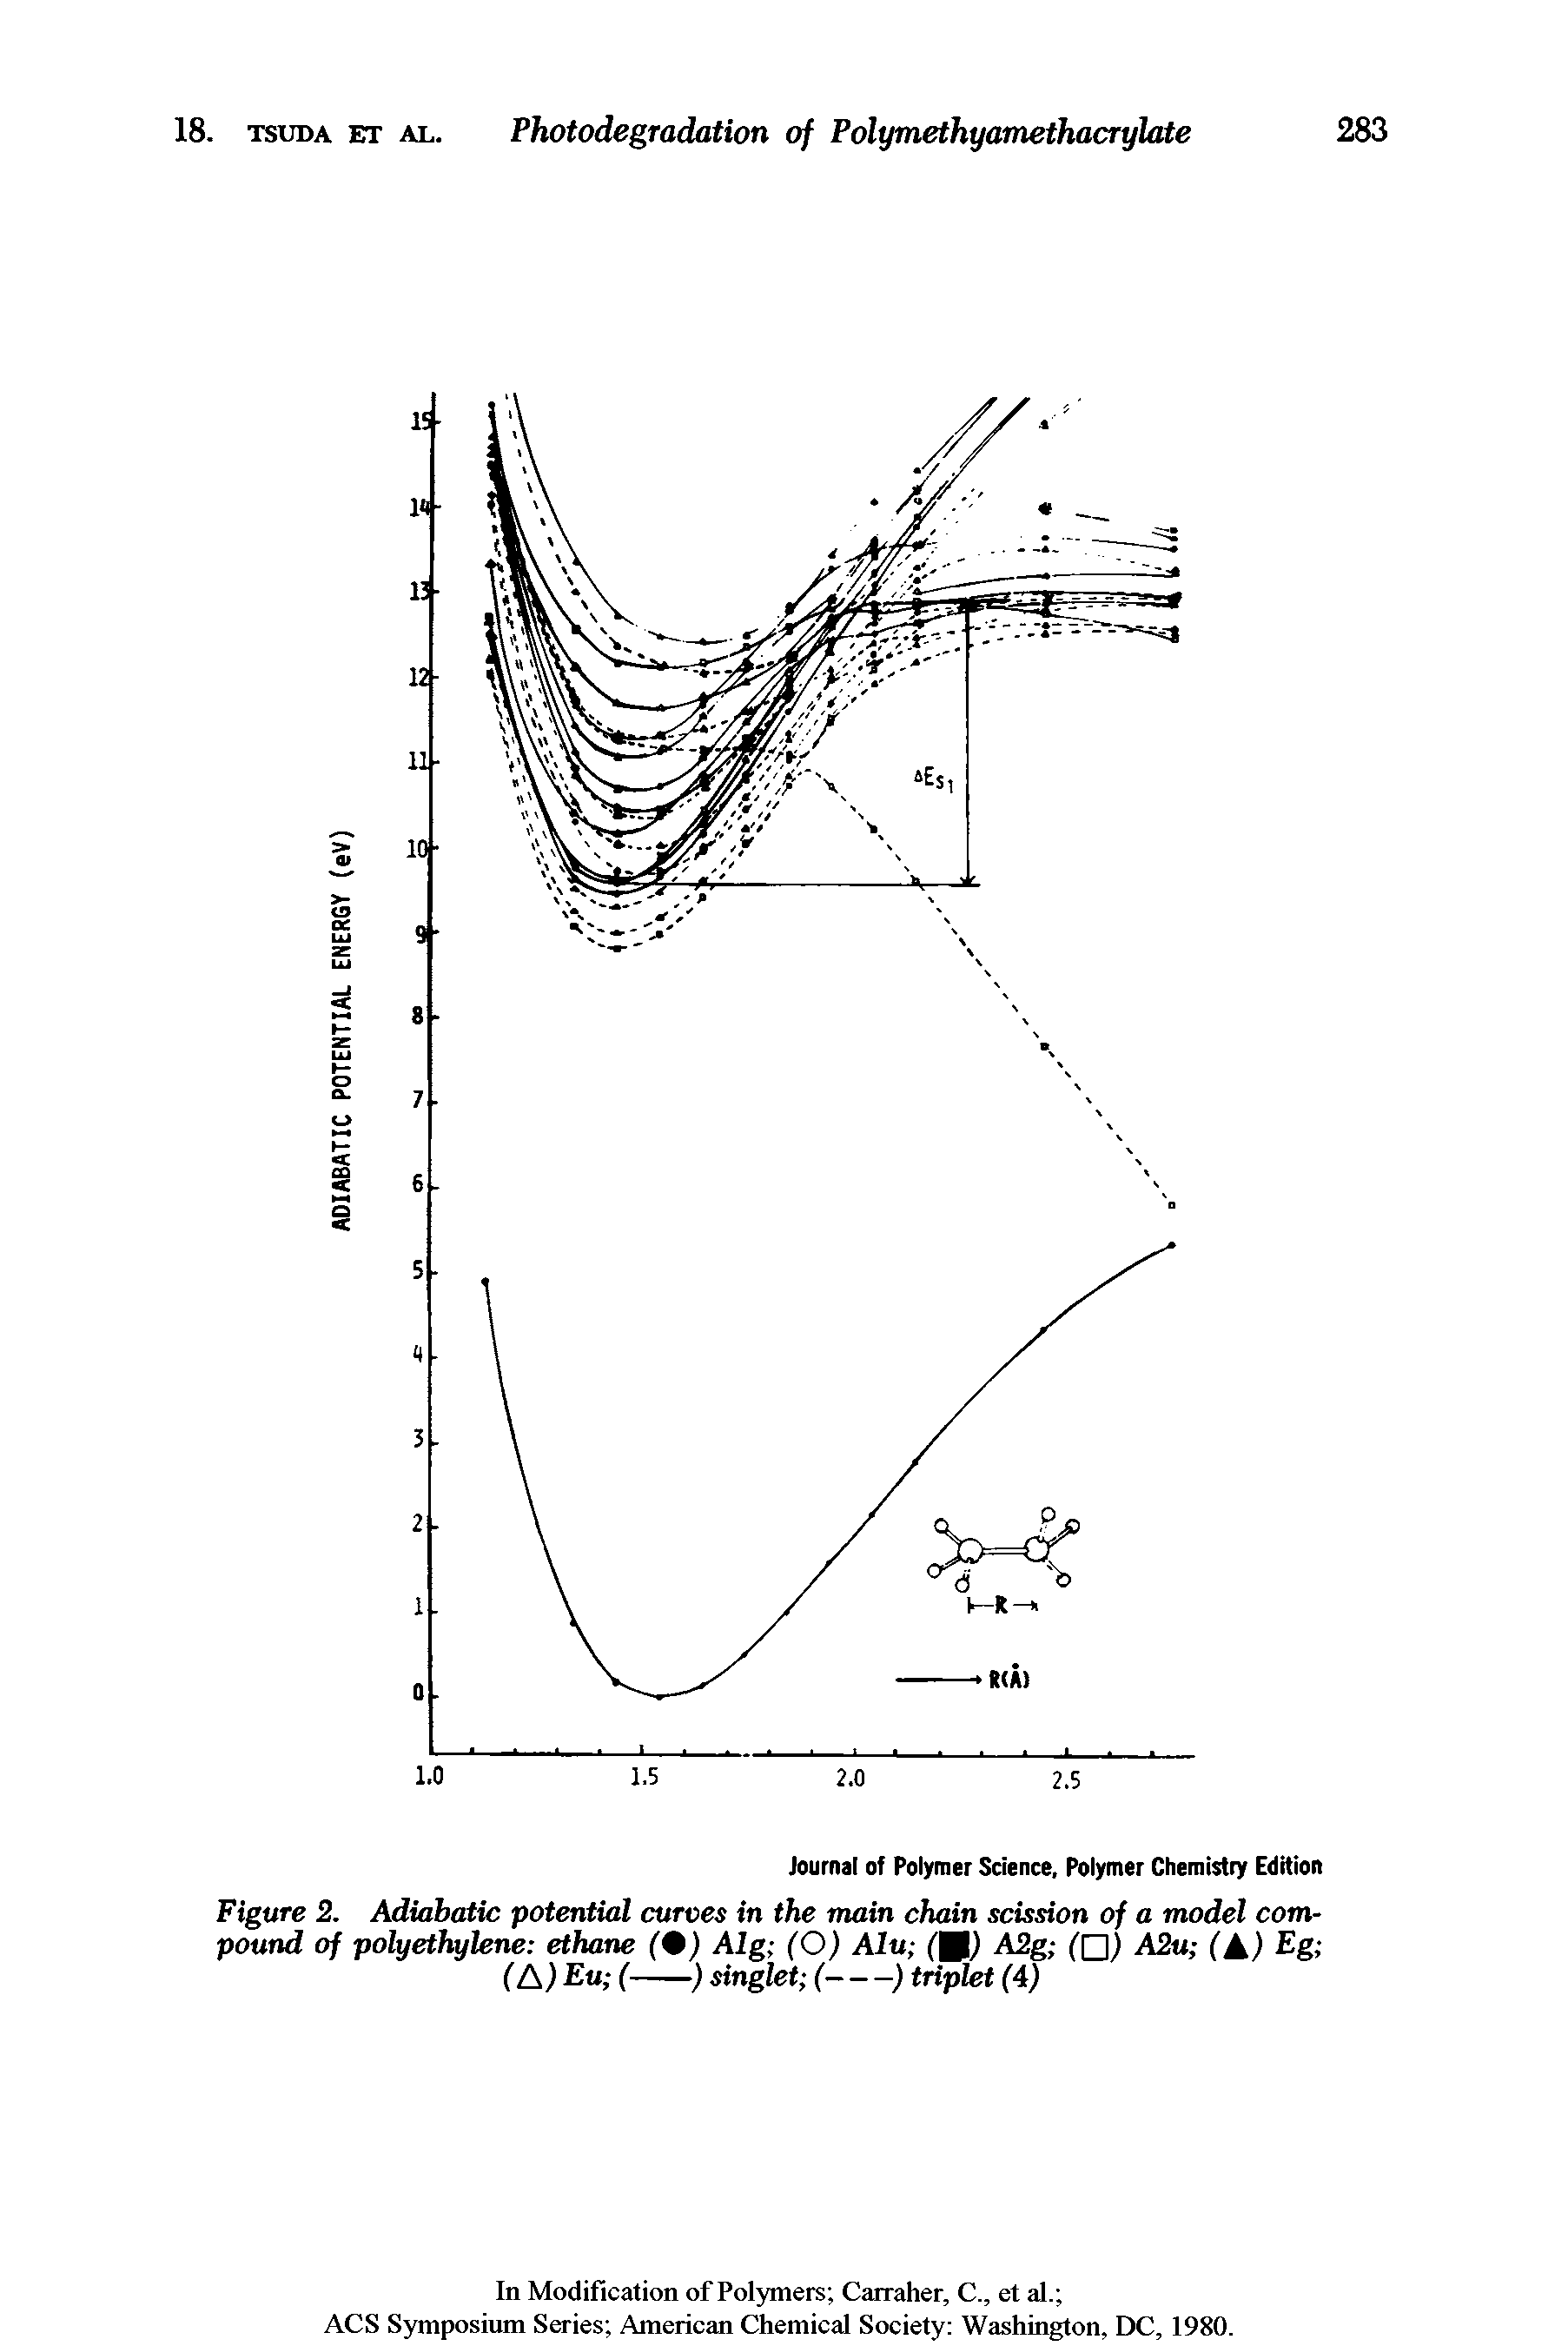 Figure 2. Adiabatic potential curves in the main chain scission of a model compound of polyethylene ethane (9) Alg (O) Alu (U) A2g (Q) A2u (A) Eg (A) Eu (-------------------------) singlet (---) triplet (4)...